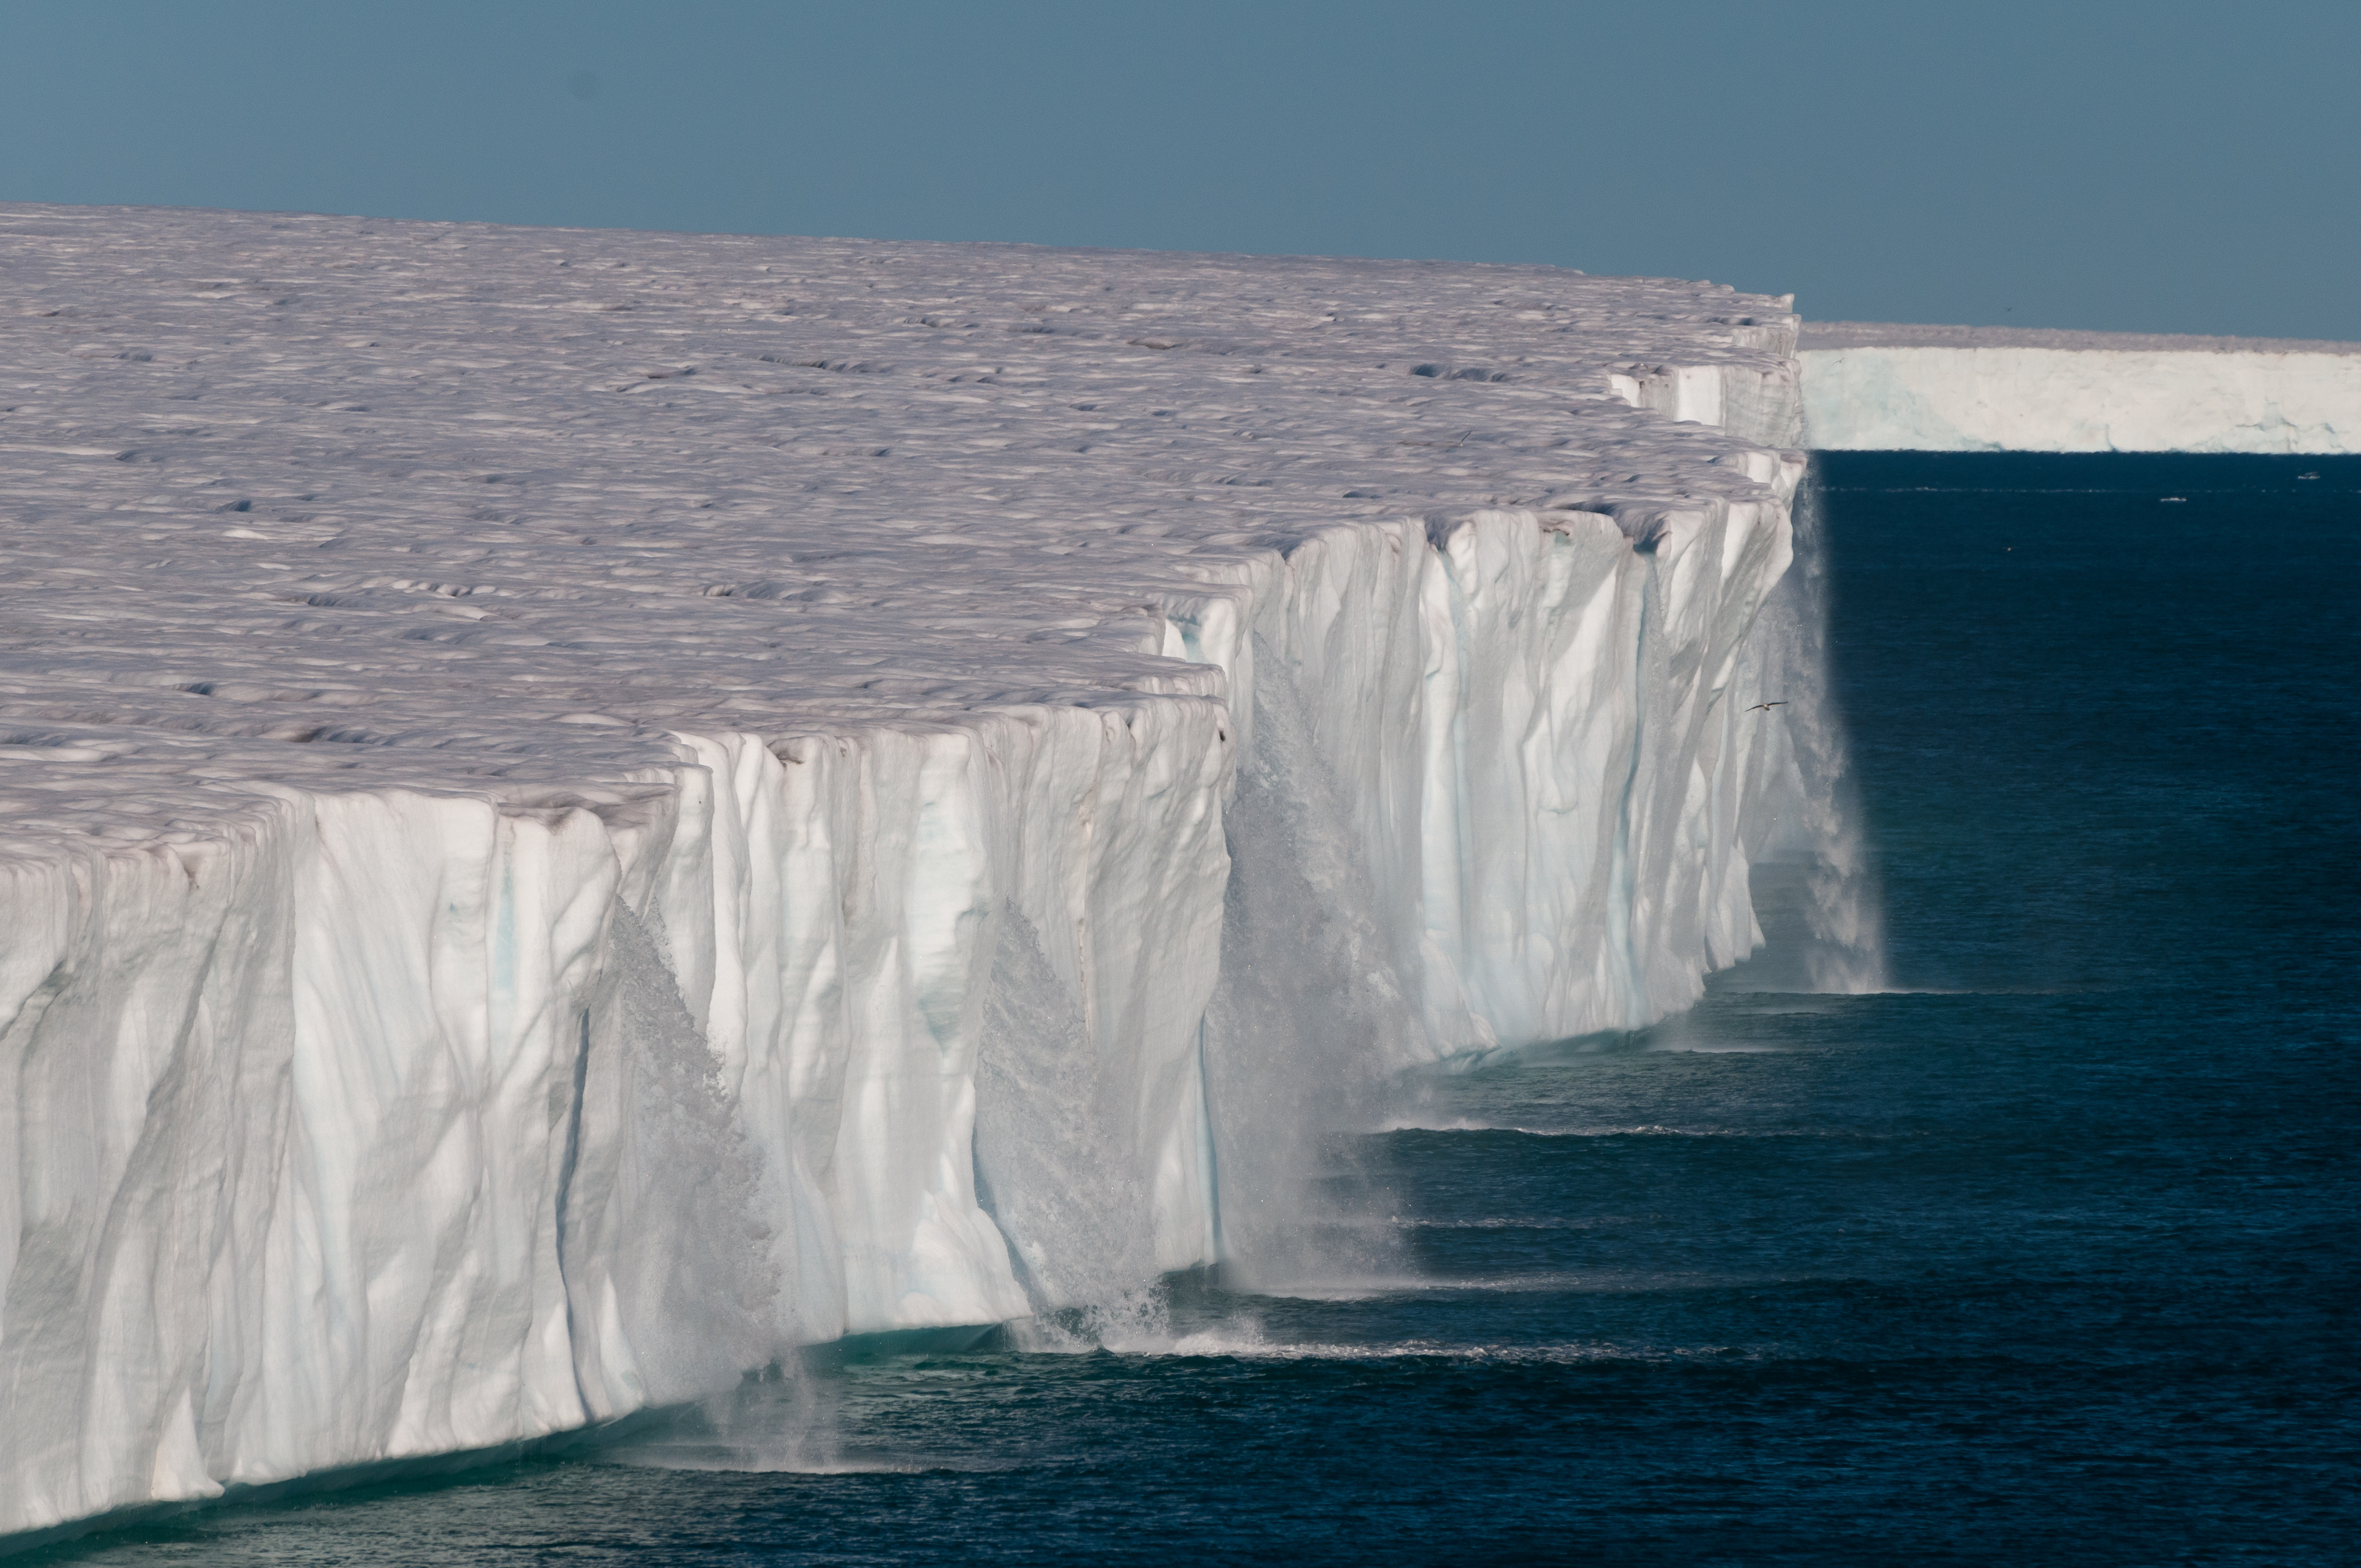 melting ice shelves could raise sea level immensely